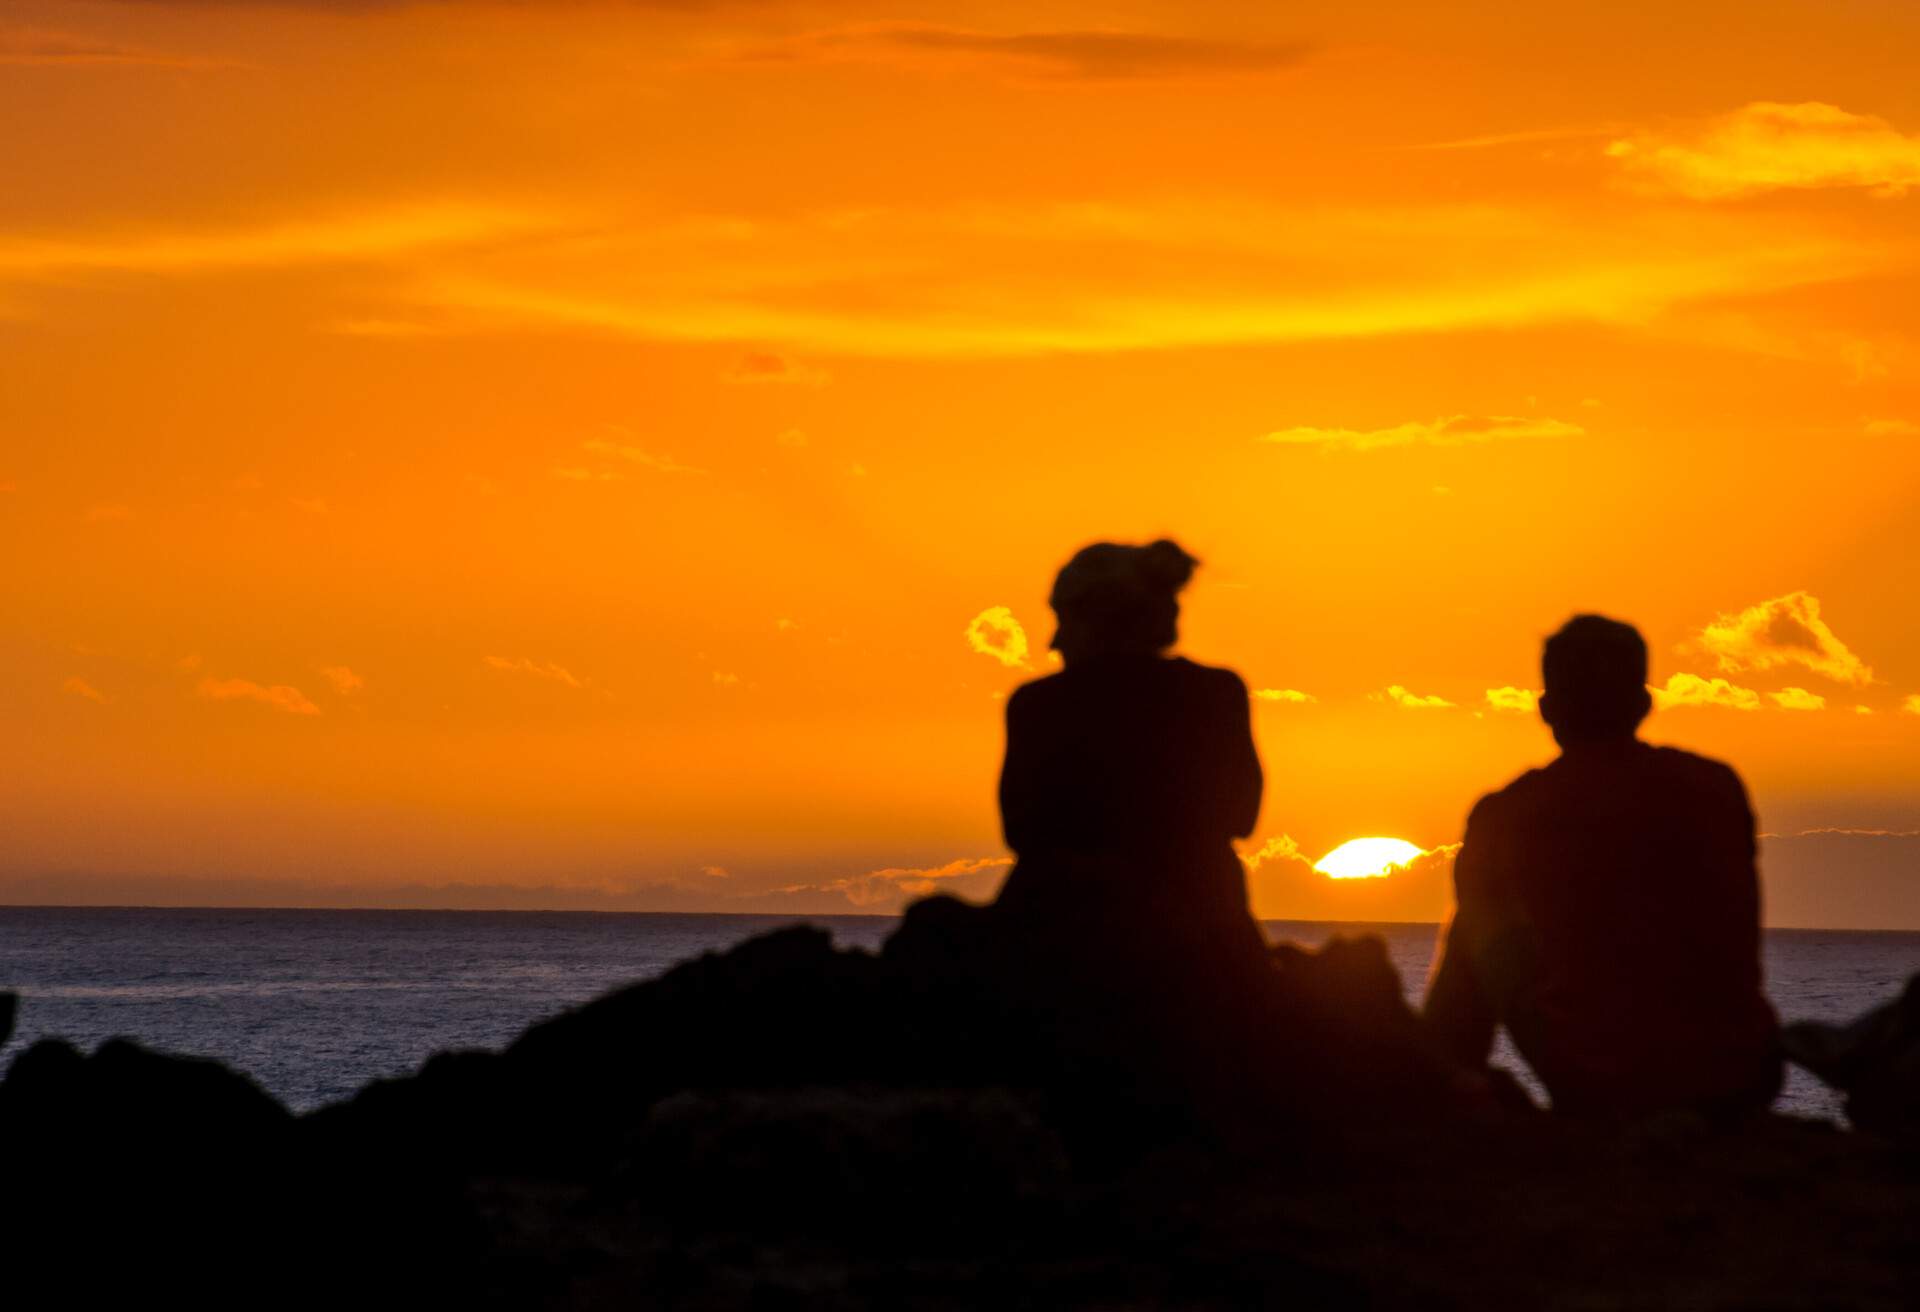 DEST_SPAIN_TENERIFE_THEME_PEOPLE_SUNSET_SEA_GettyImages